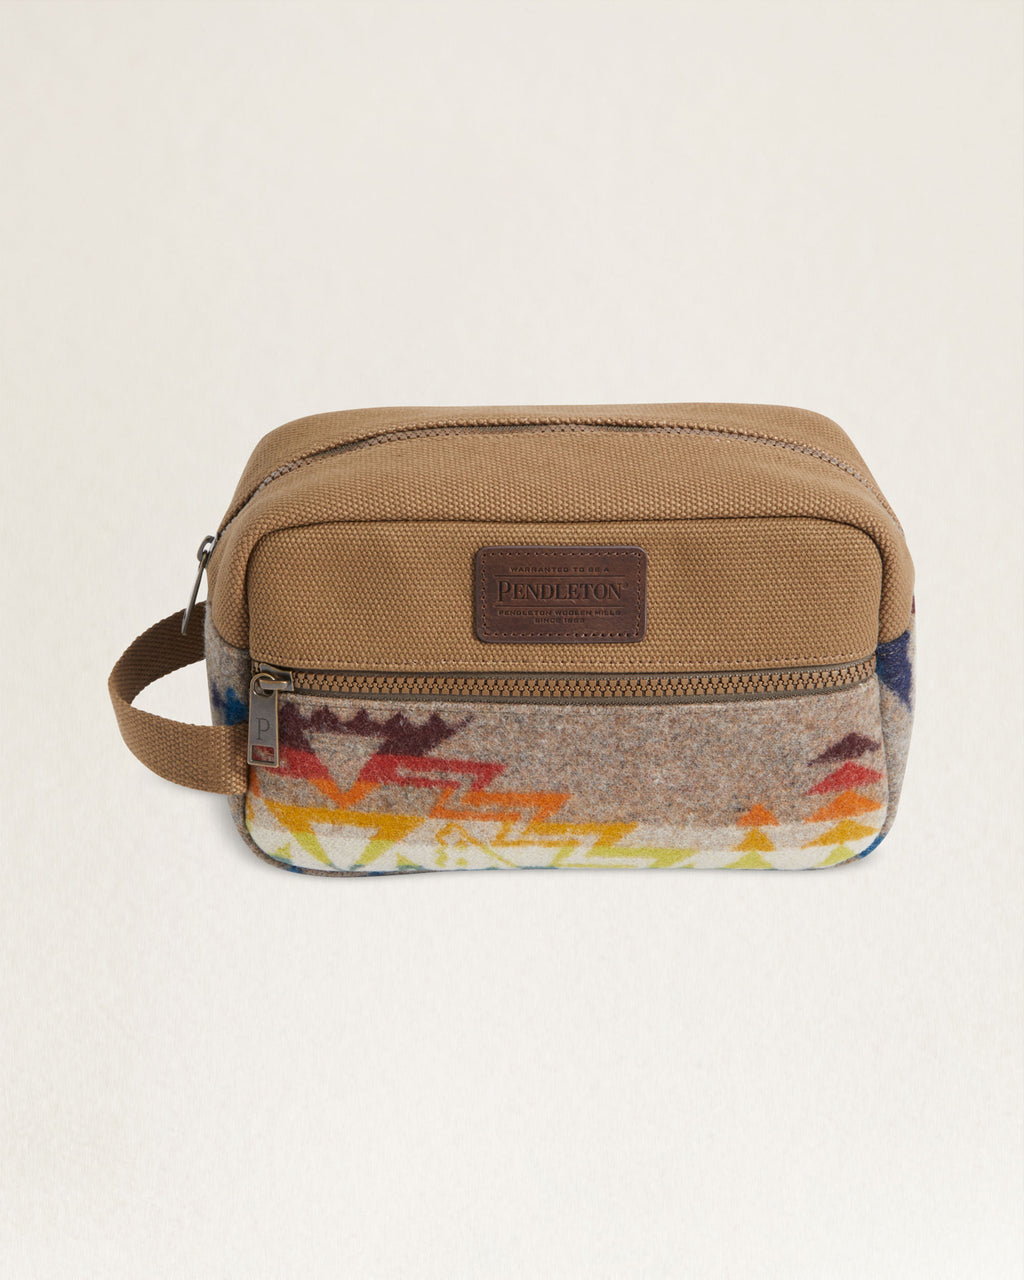 Carry All Pouch in Highland Peak Tan